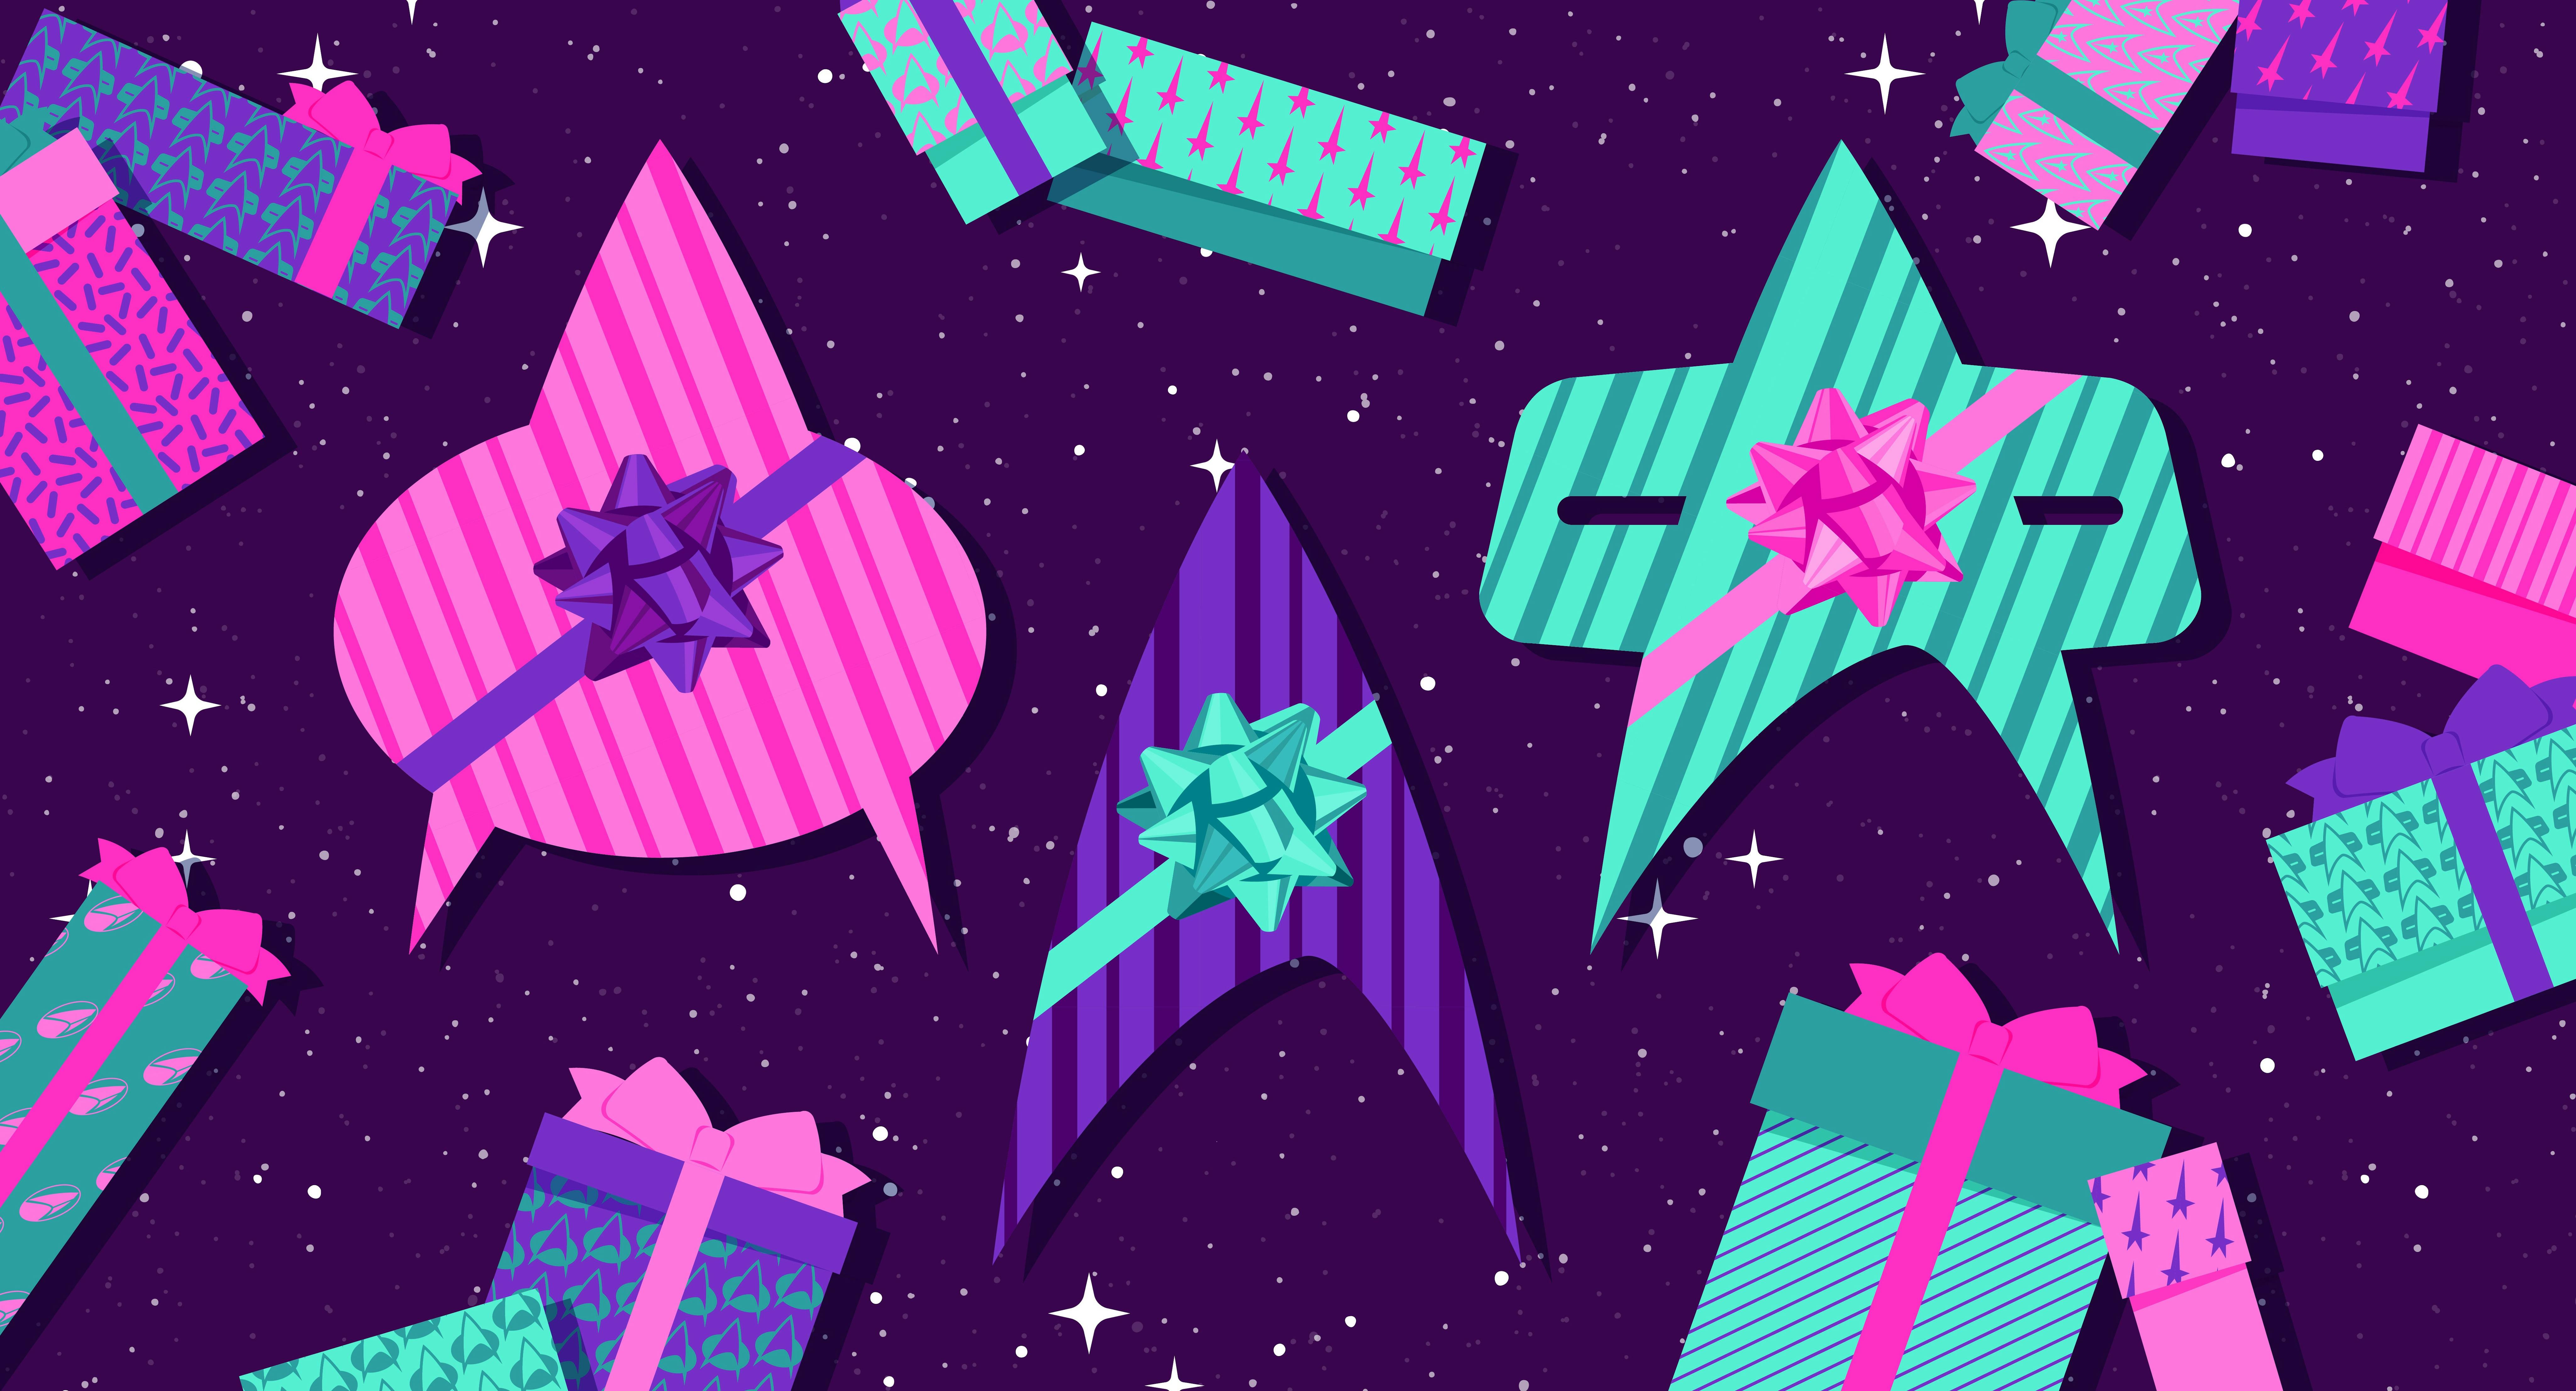 Illustrated banner of holiday-themed Star Trek iconography like the delta shaped like a present